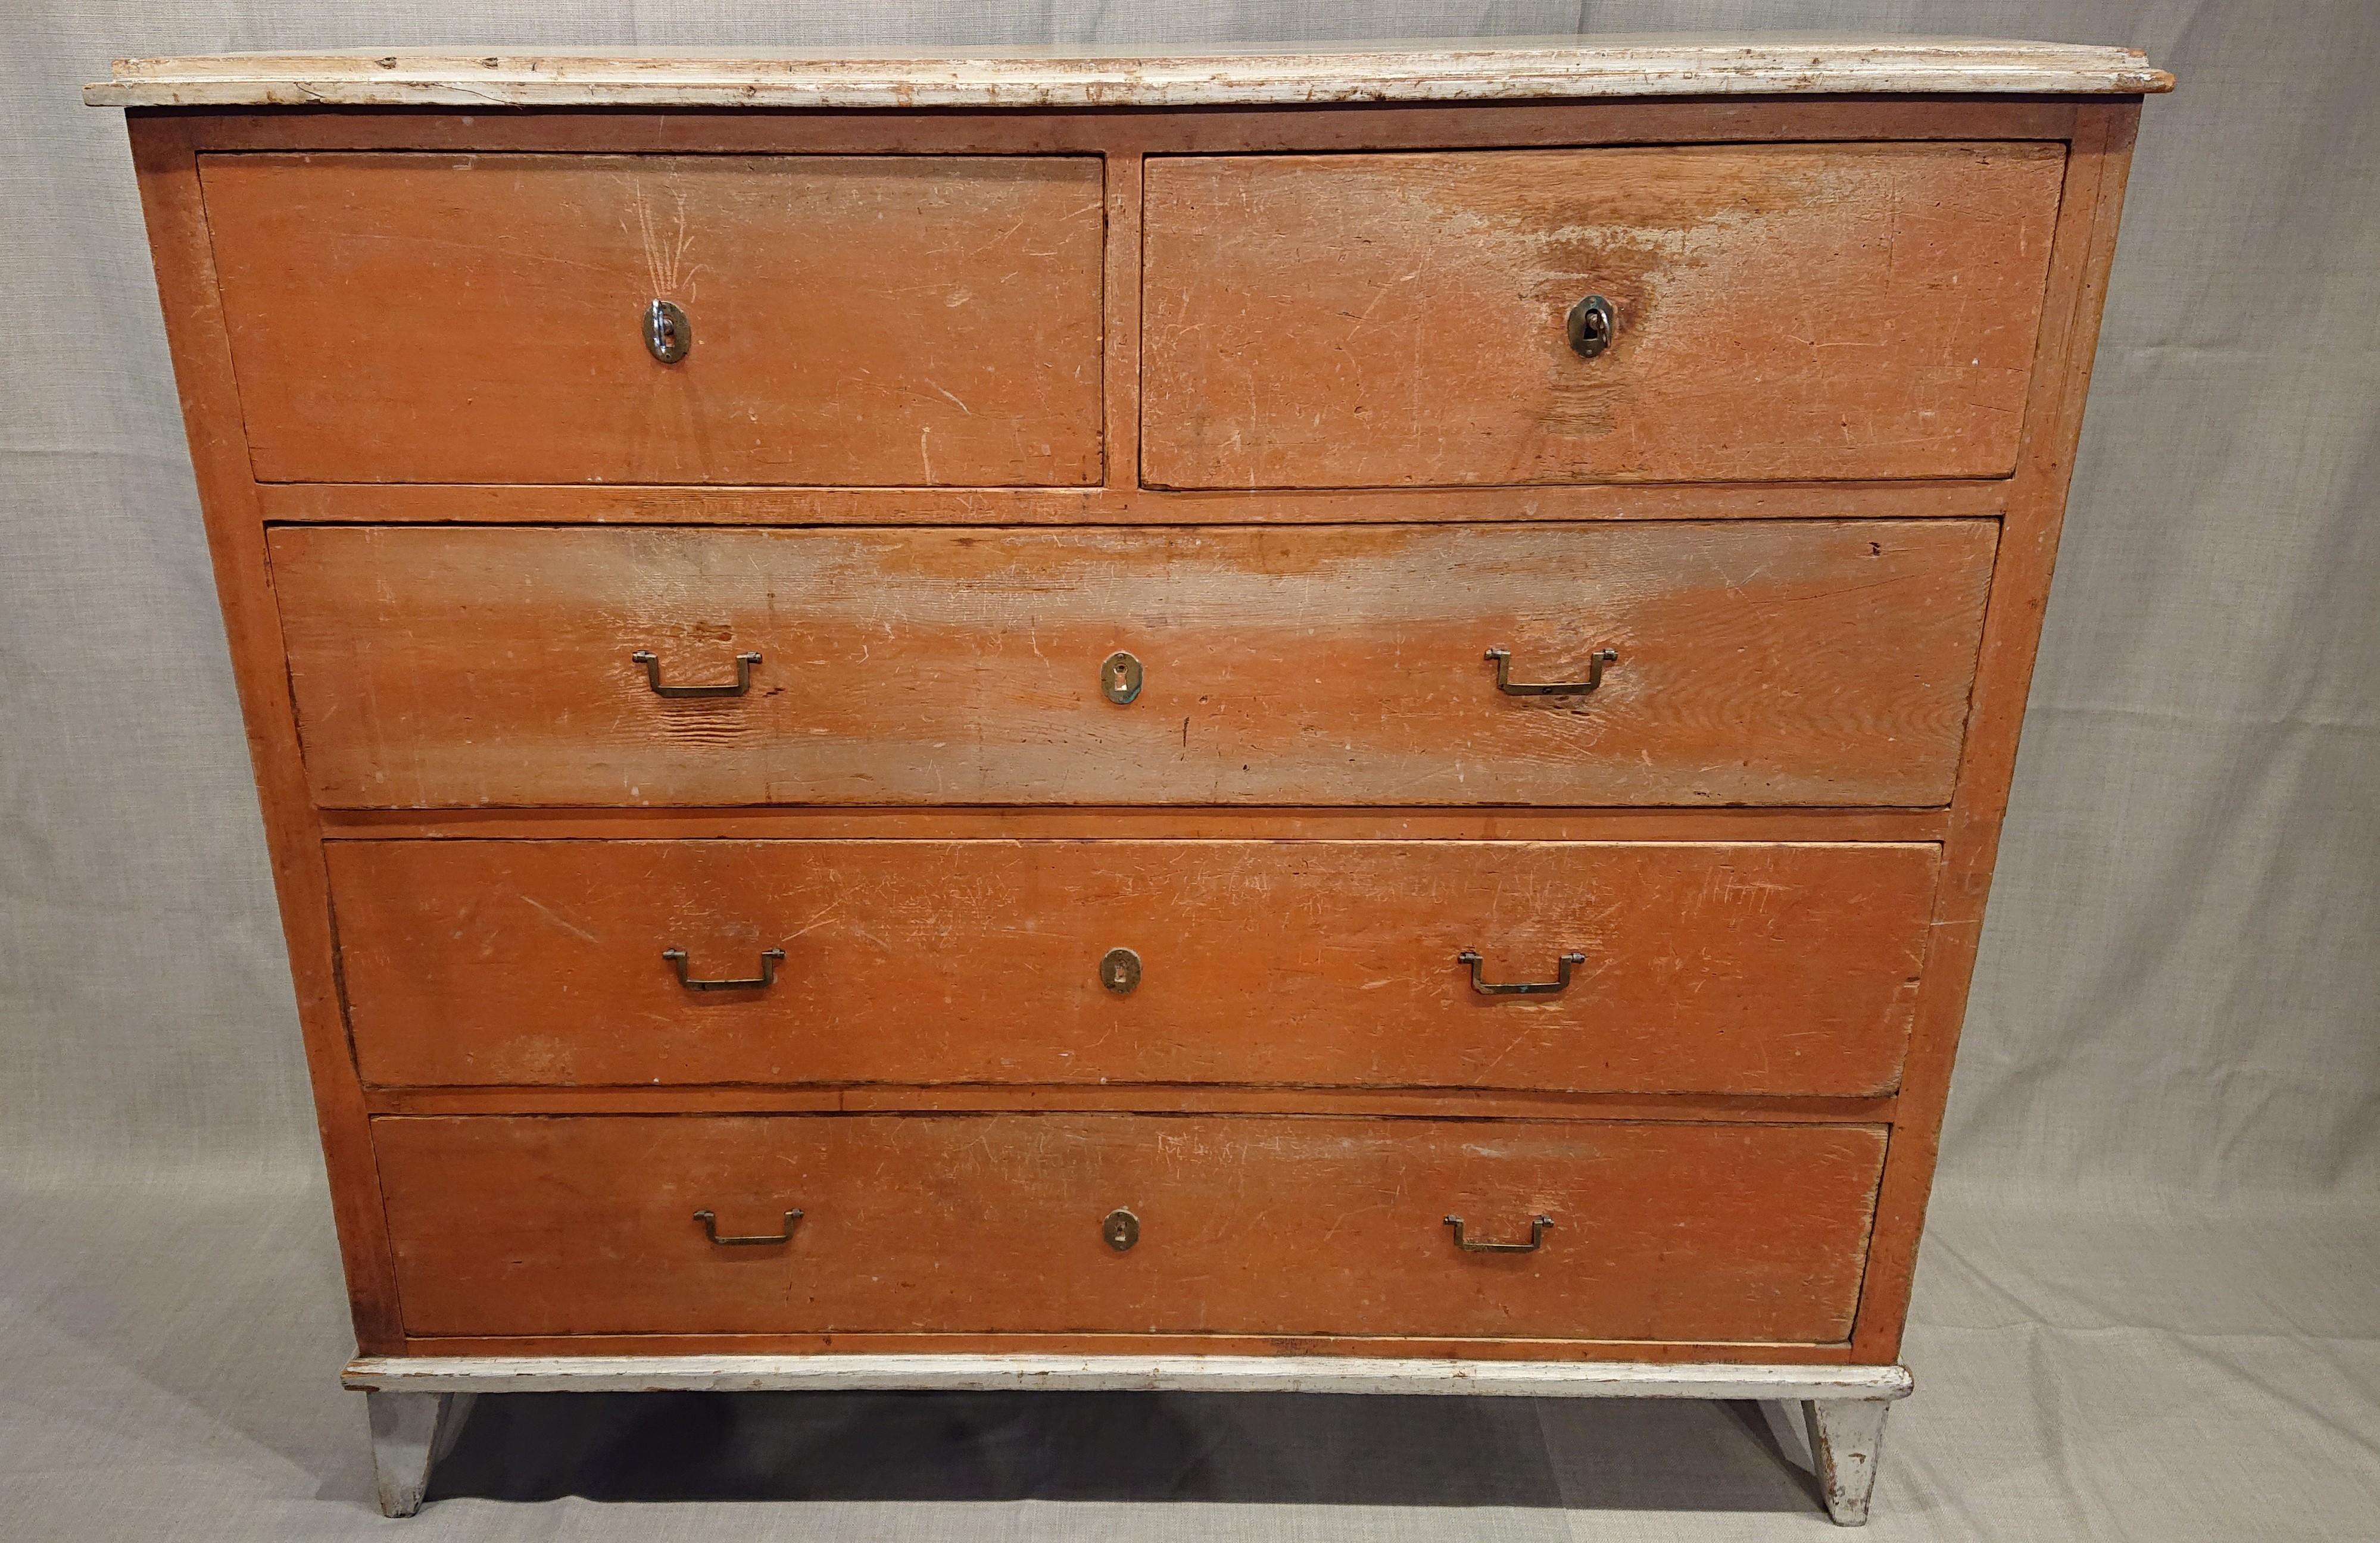 A very genuine 19th century Swedish Gustavian chest of drawers from Umea Vasterbotten, Northen Sweden.
The chest of drawers has untouched originalpaint.
Hardware and locks are original.
Right small drawer has lock & key.
The left drawer has no